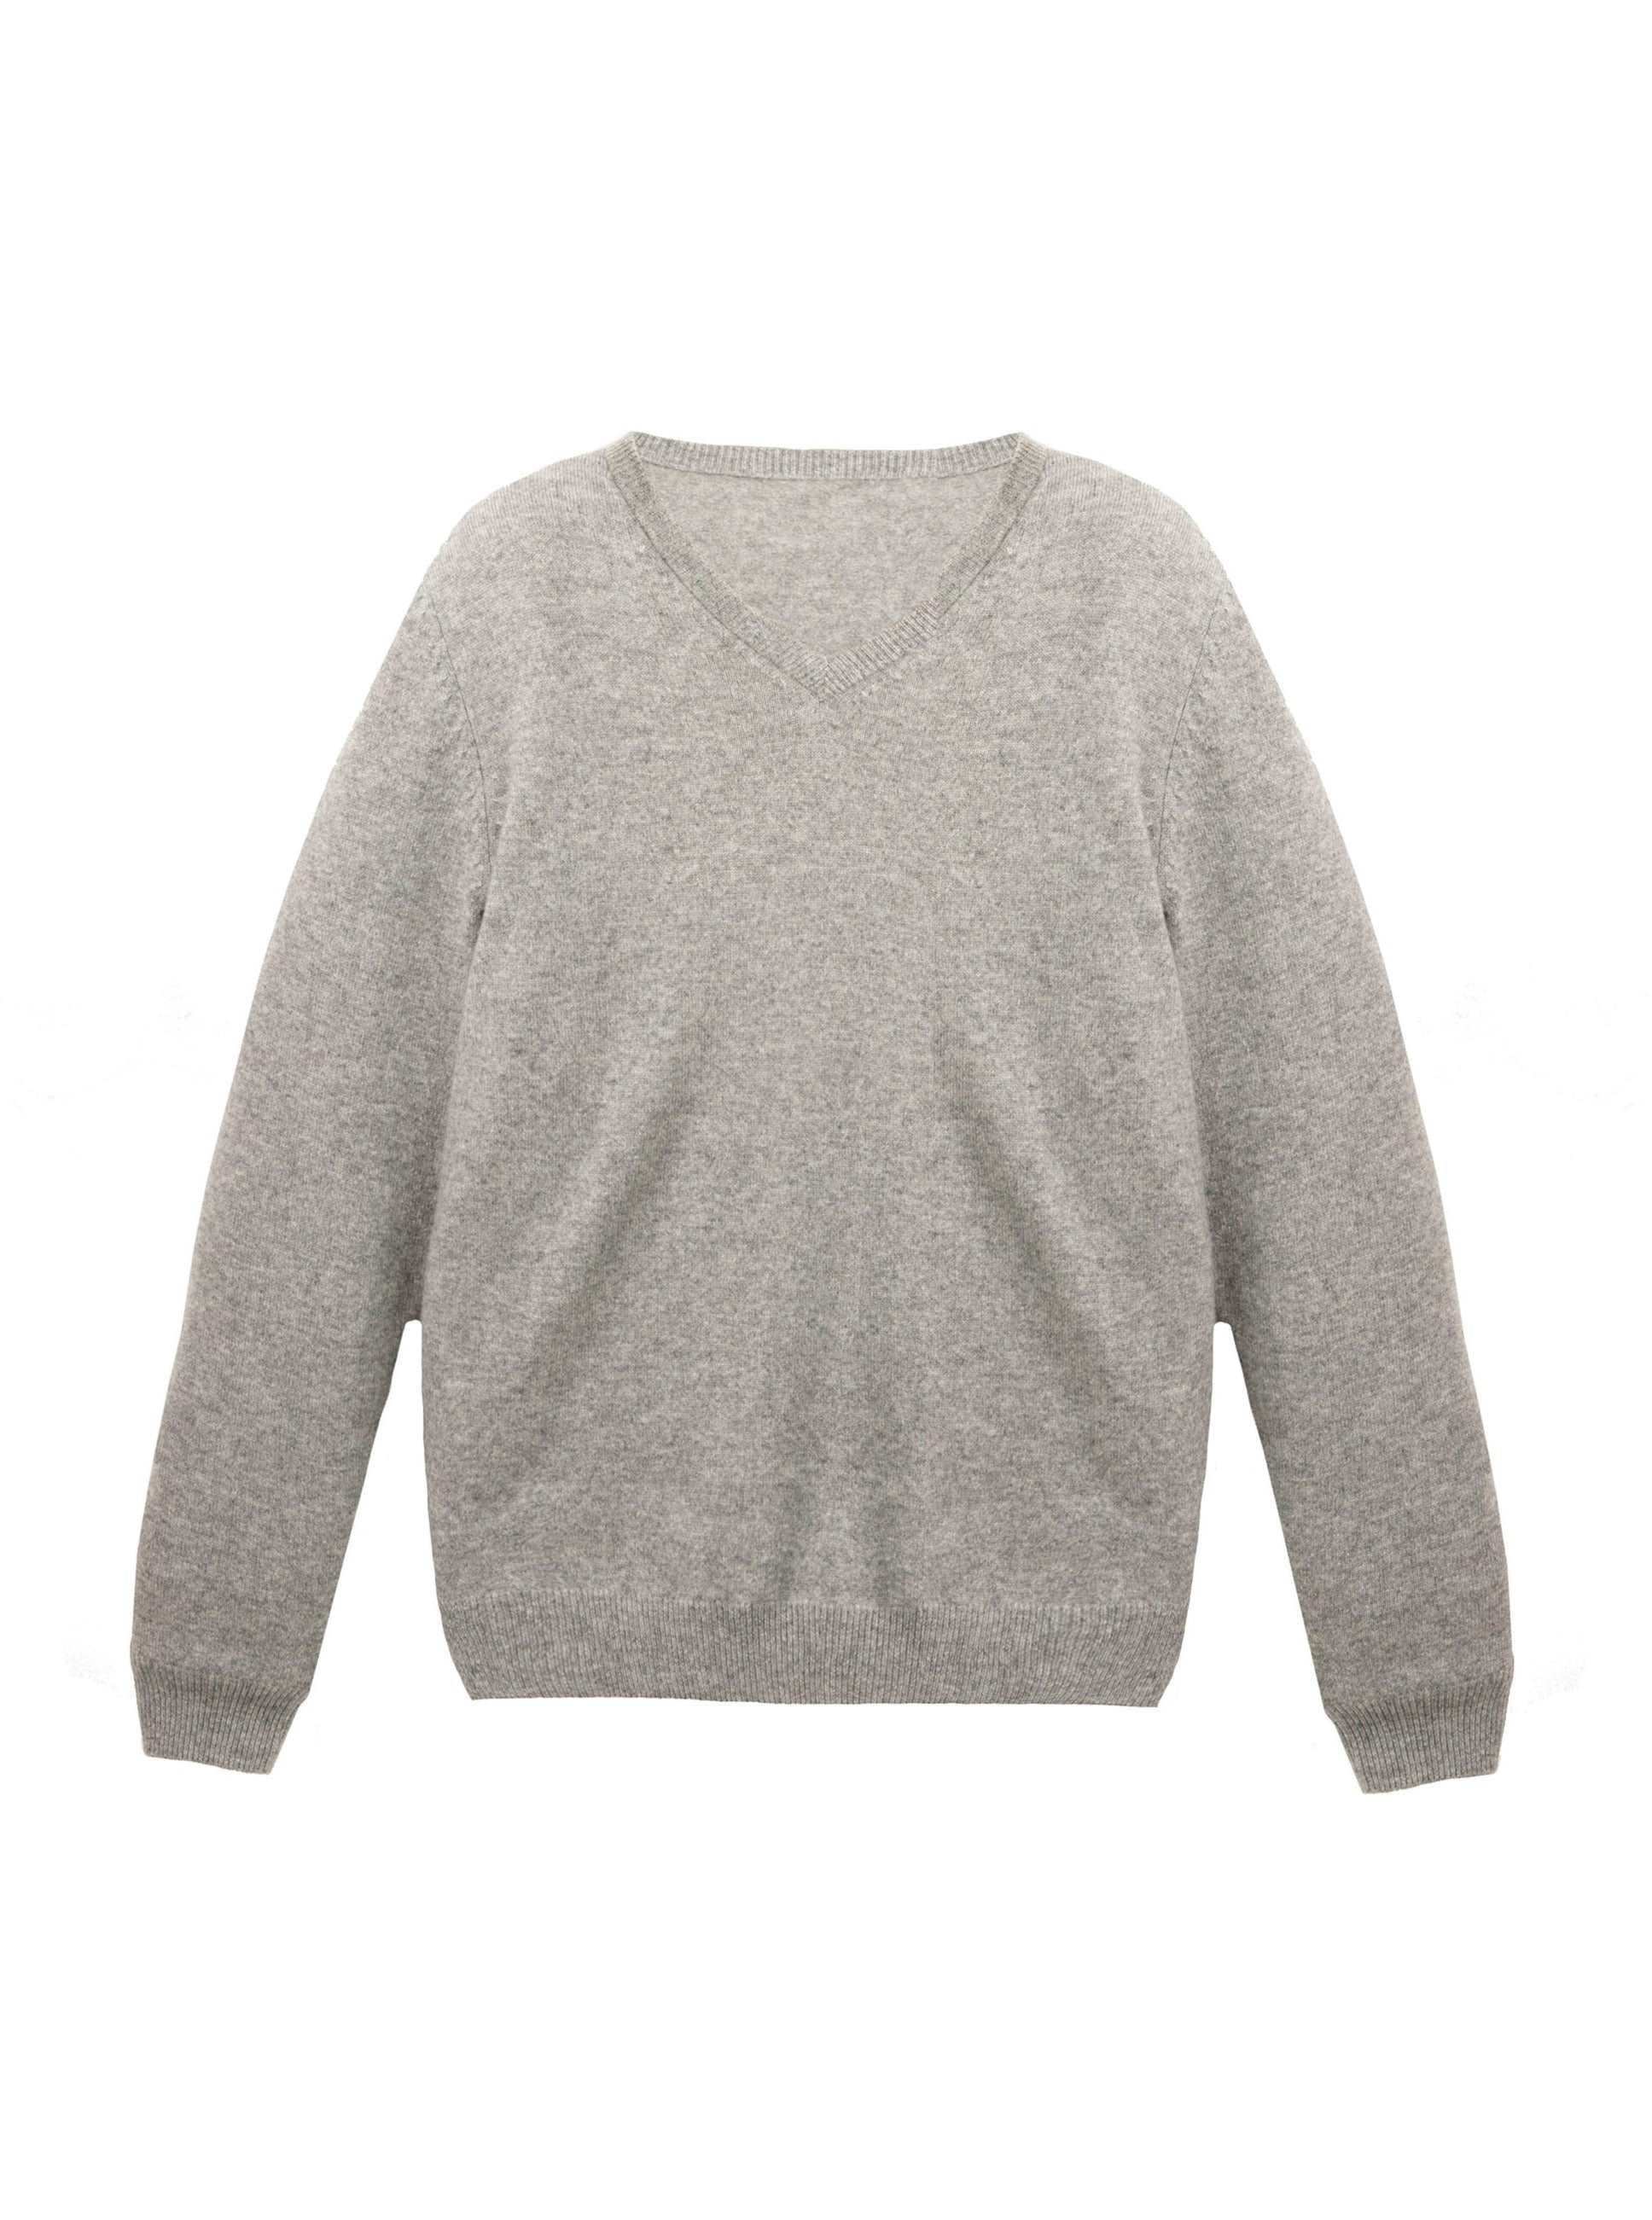 Gent's Cashmere Vee | Made to Order